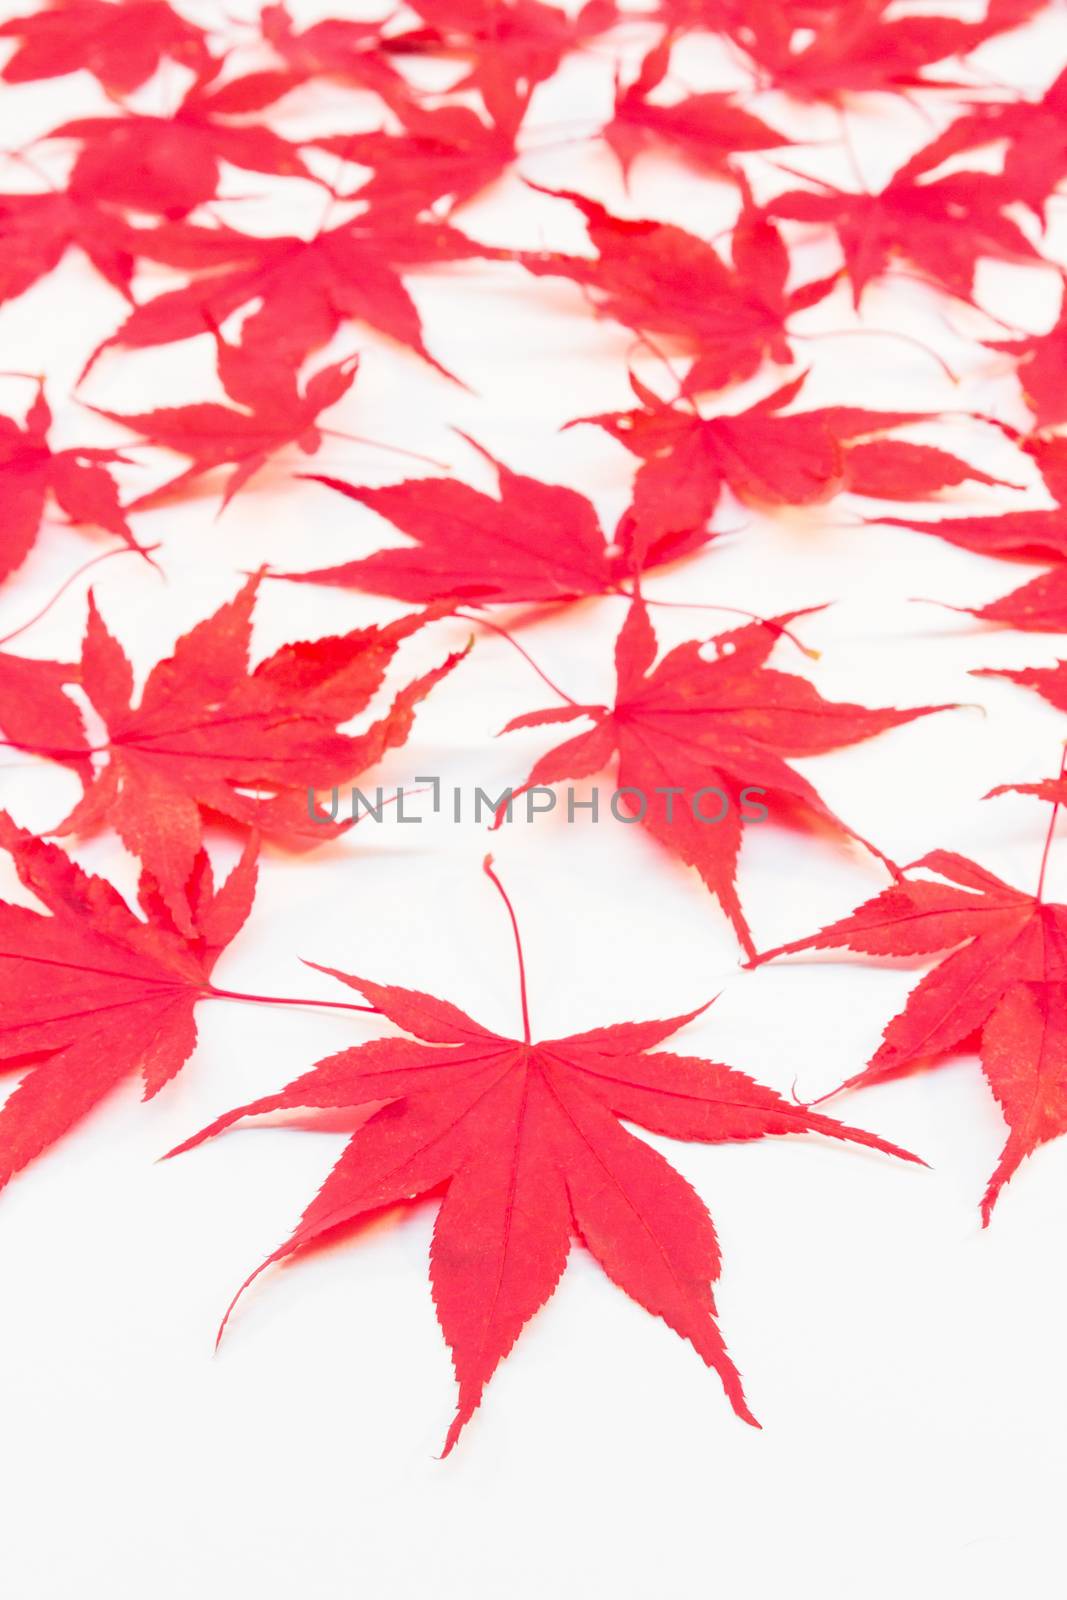 Red Acer leaves in autumn isolated on white background